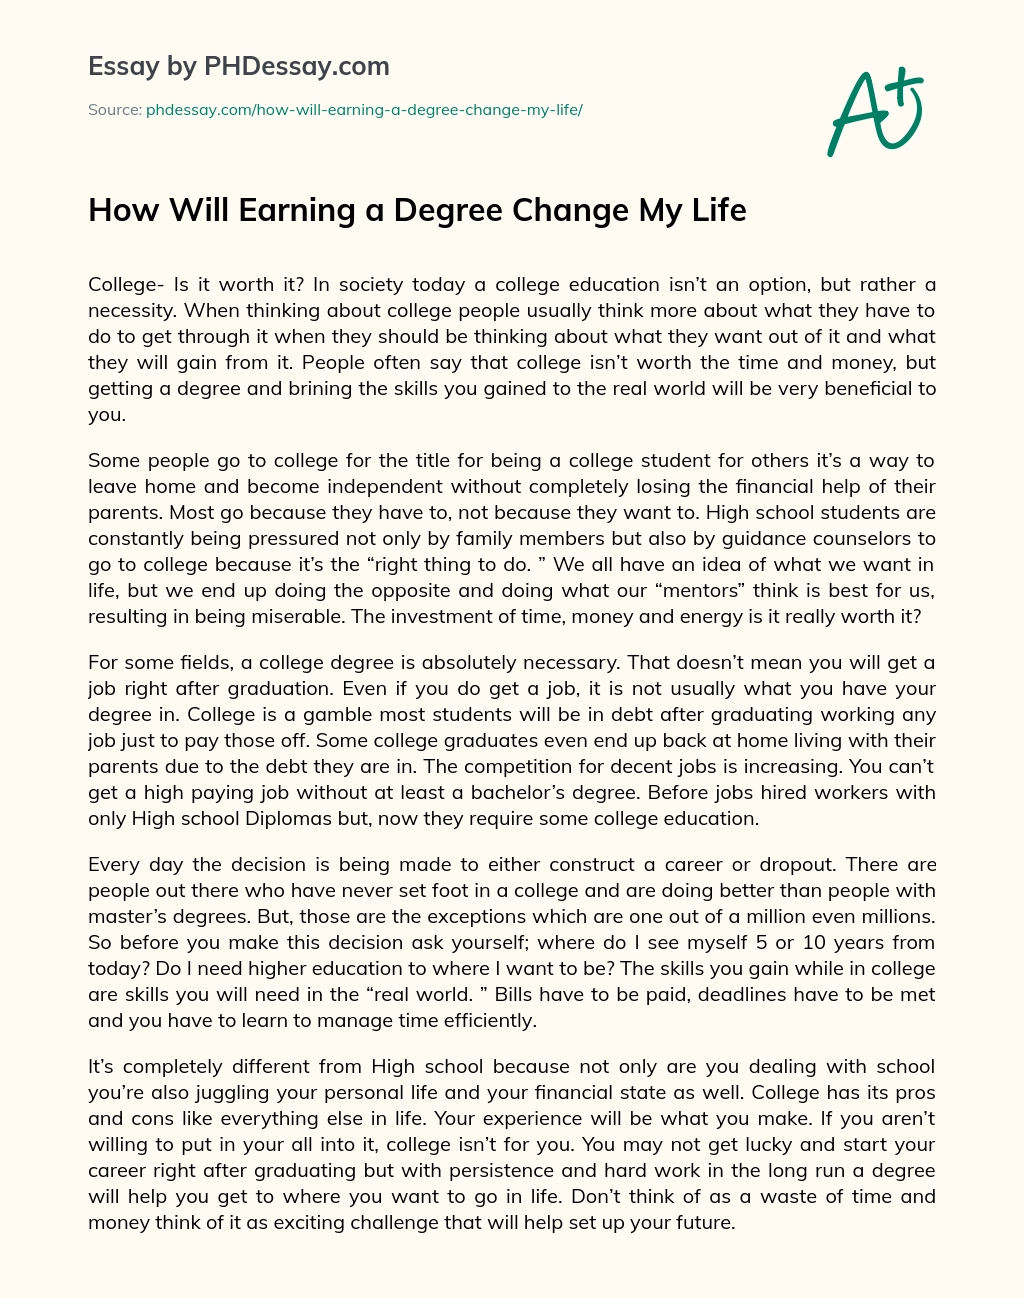 essay about life changes